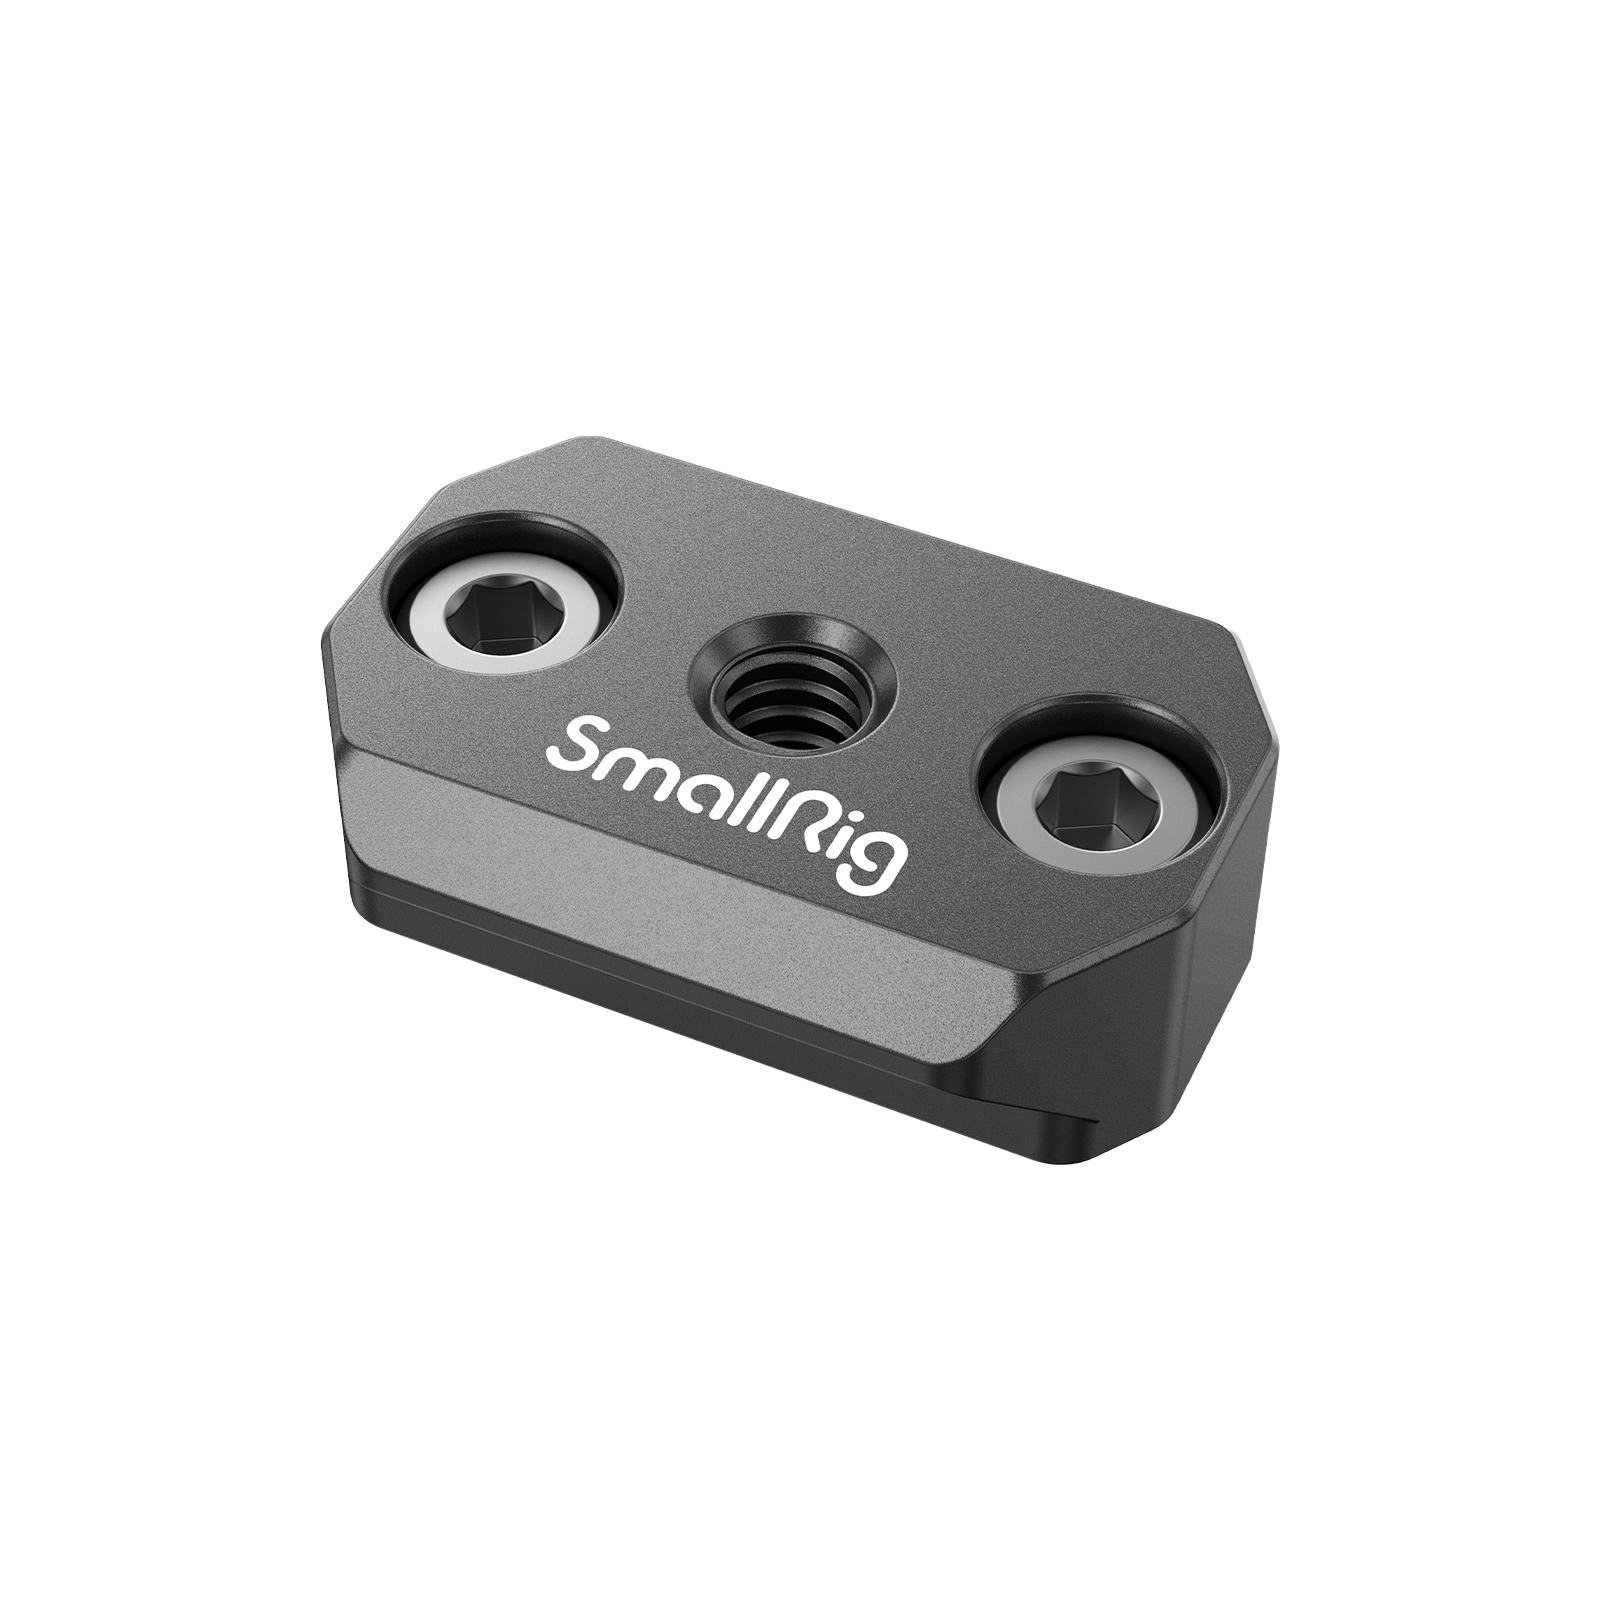 SmallRig Mount Plate With NATO Rail for DJI Ronin-S / Ronin-SC - 3032